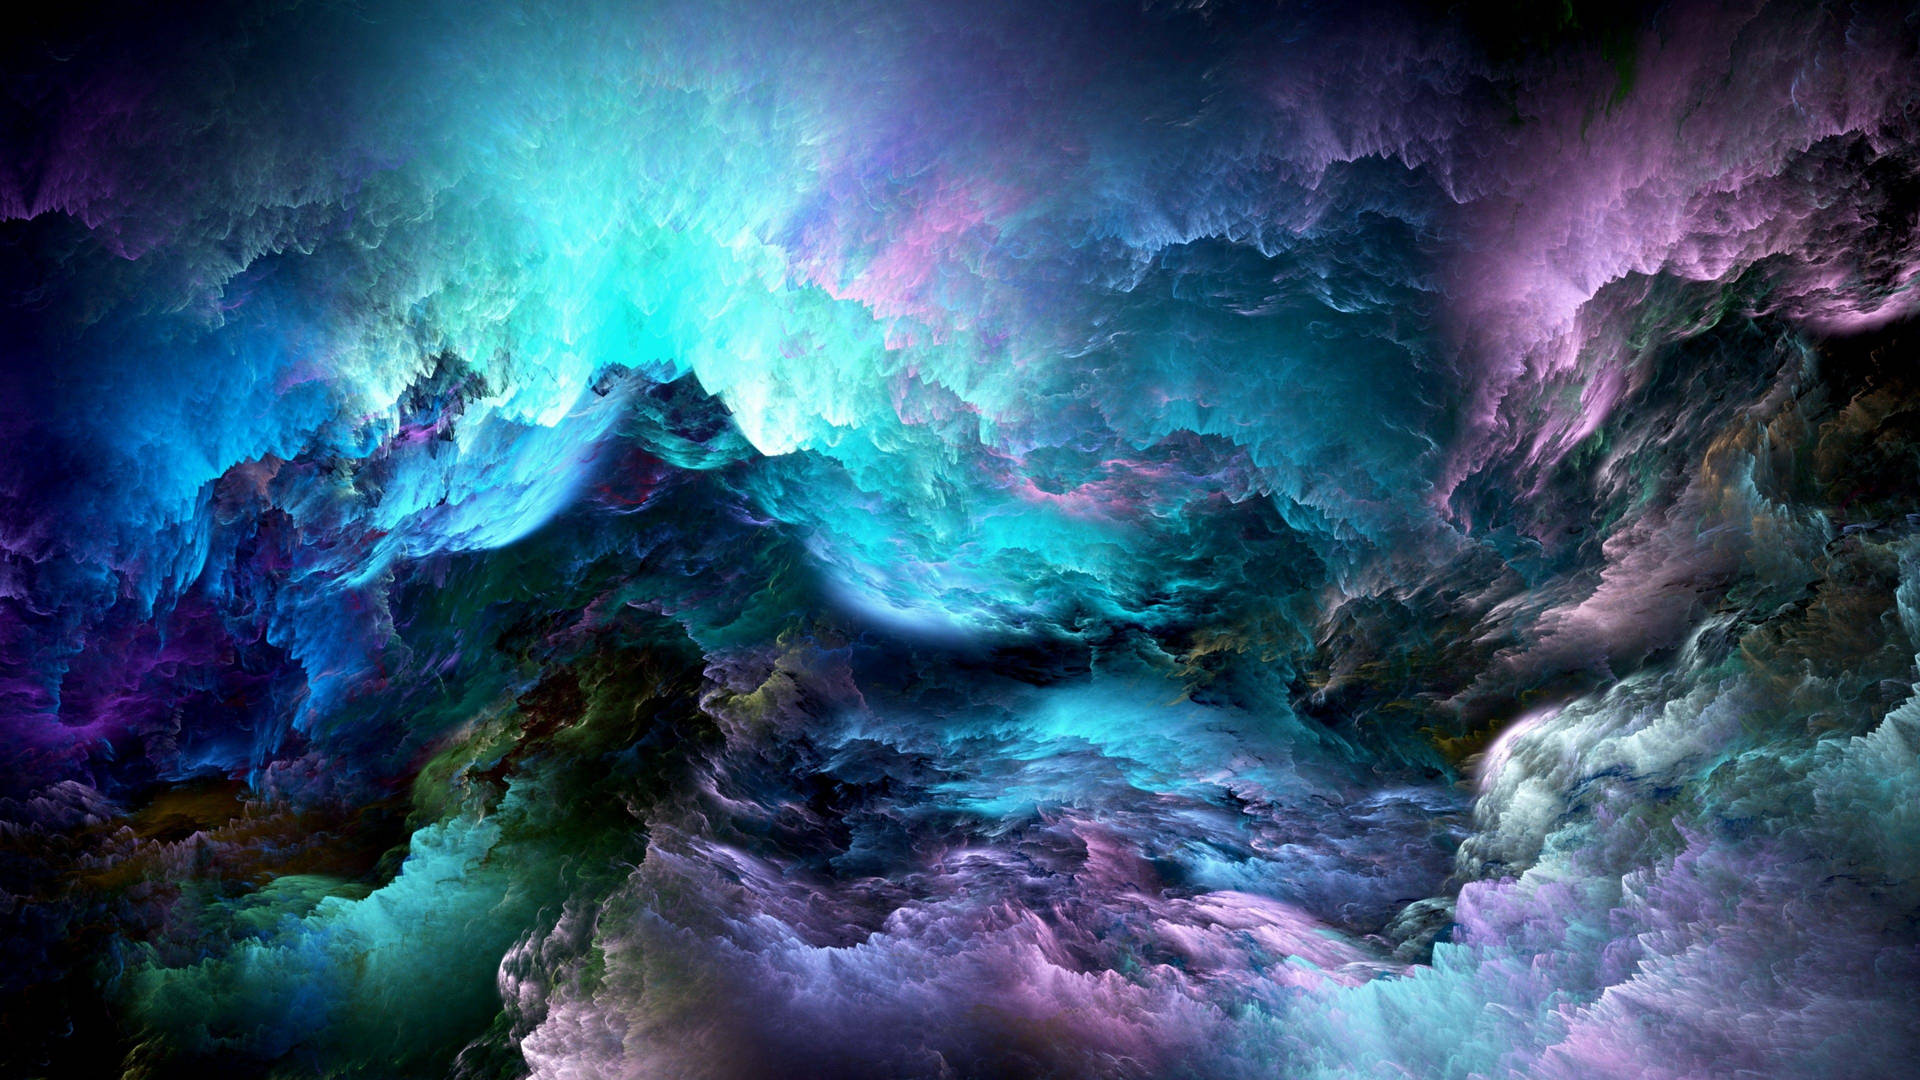 Abstract 3840X2160 Wallpaper and Background Image